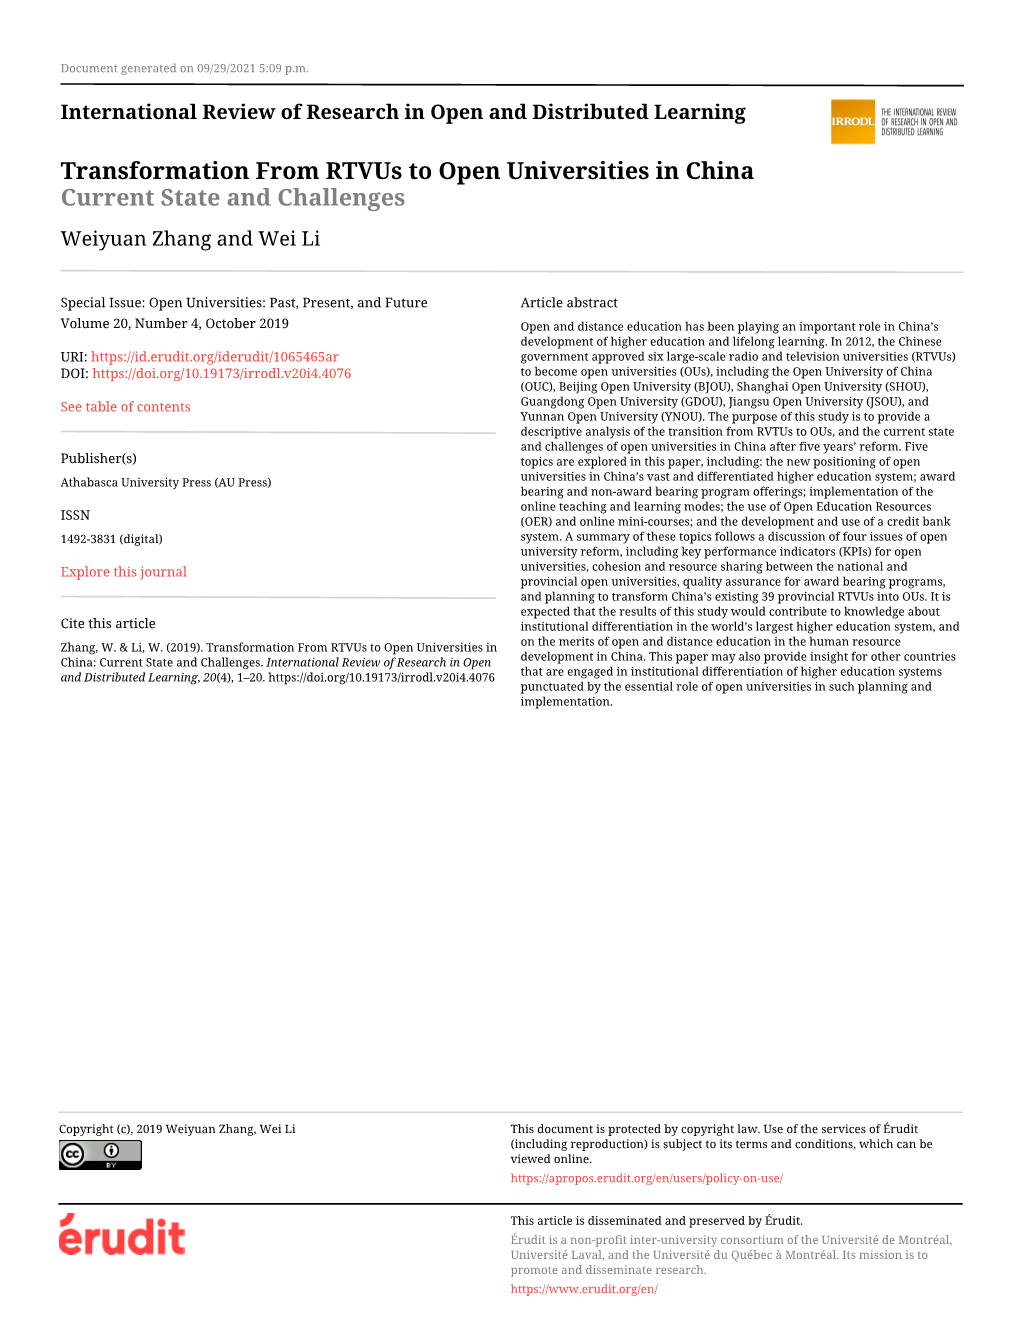 Transformation from Rtvus to Open Universities in China Current State and Challenges Weiyuan Zhang and Wei Li